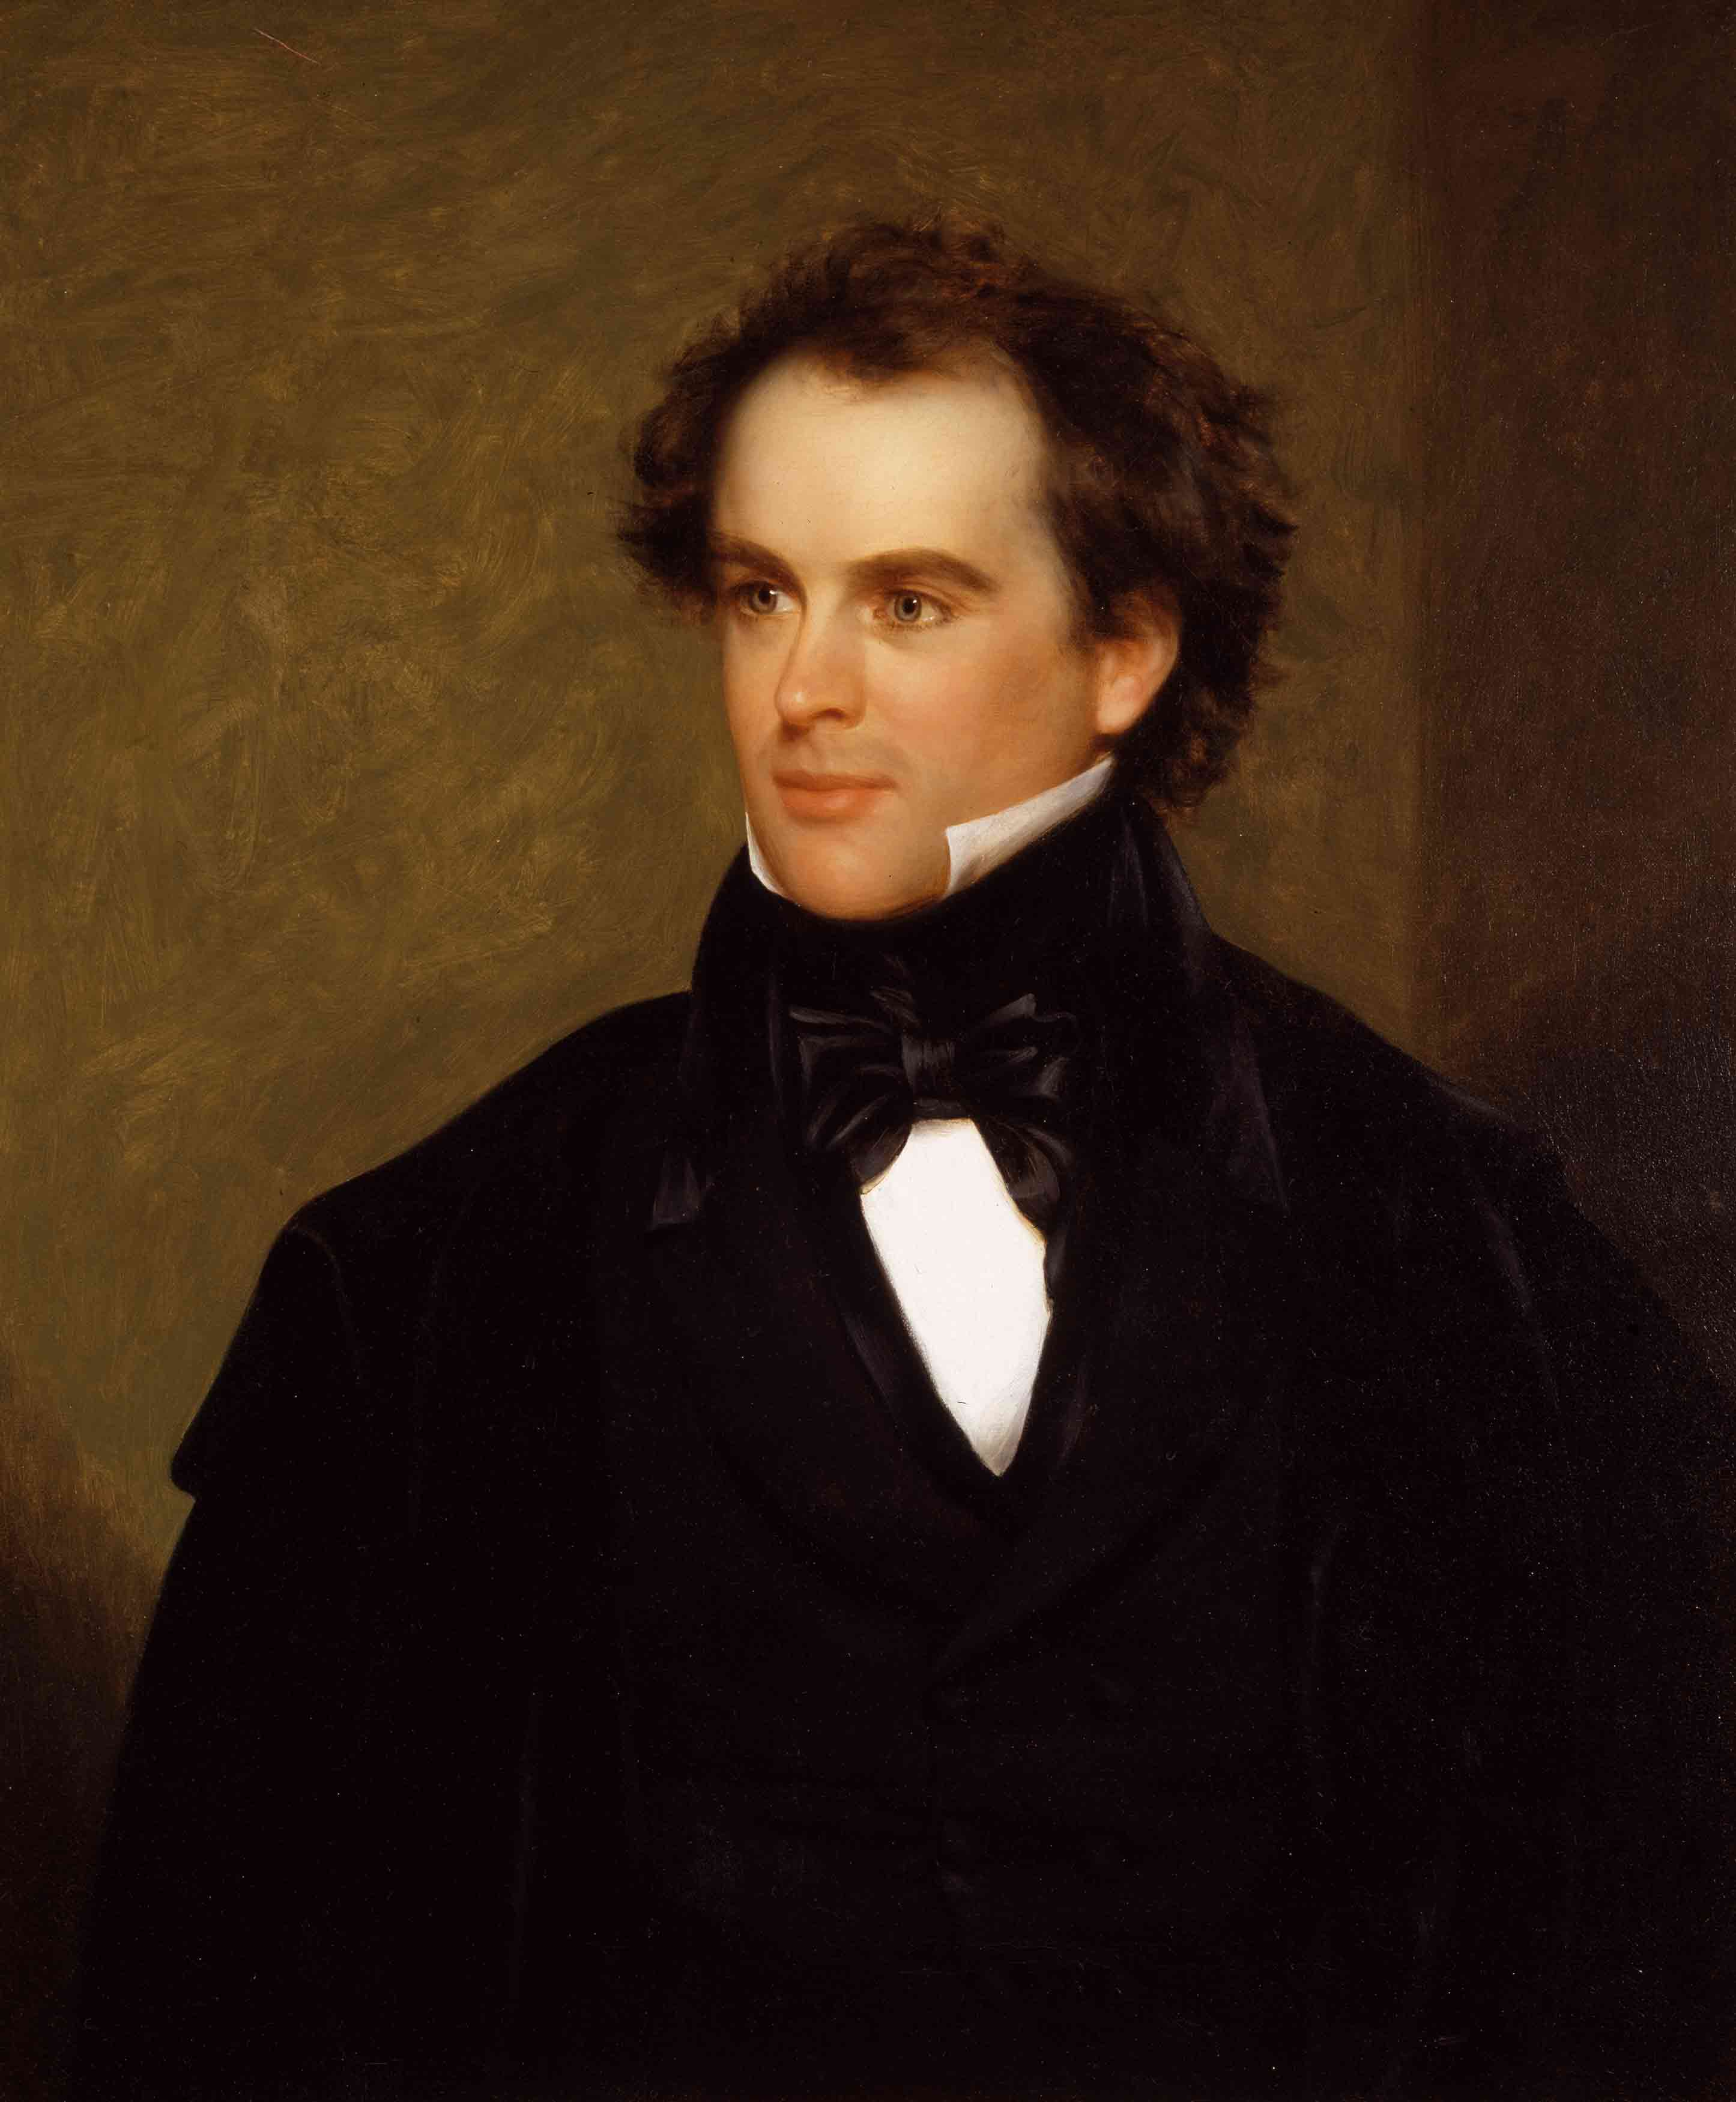 10 Things You May Not Know About Nathaniel Hawthorne - HISTORY